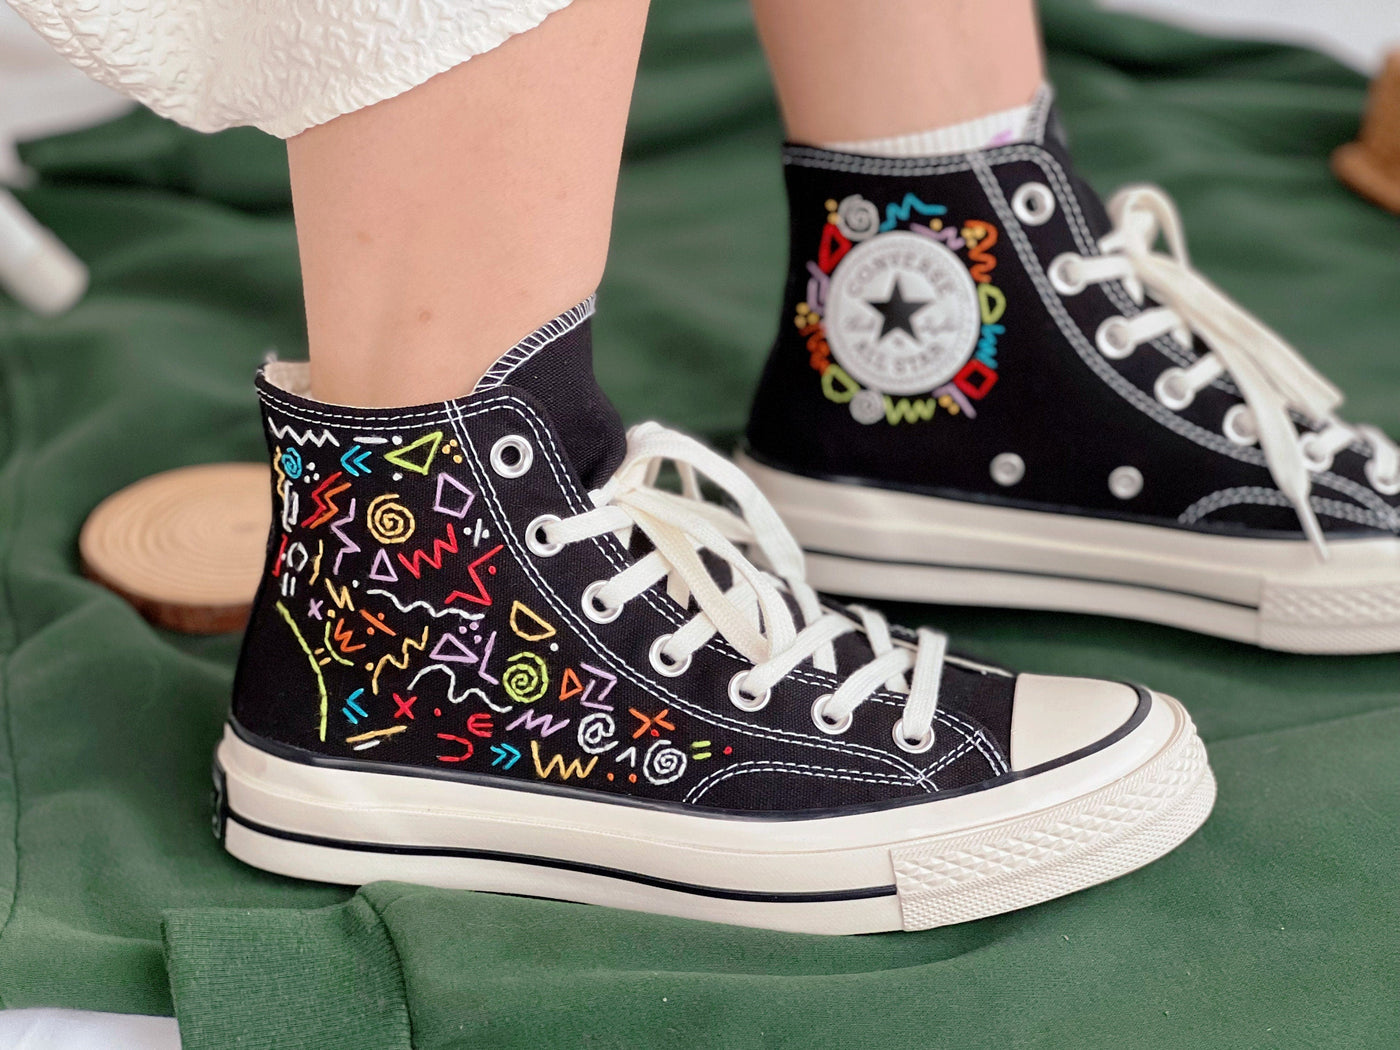 Embroidered Convers,Converse Hi Tops, Math Formula Embroidery Pattern